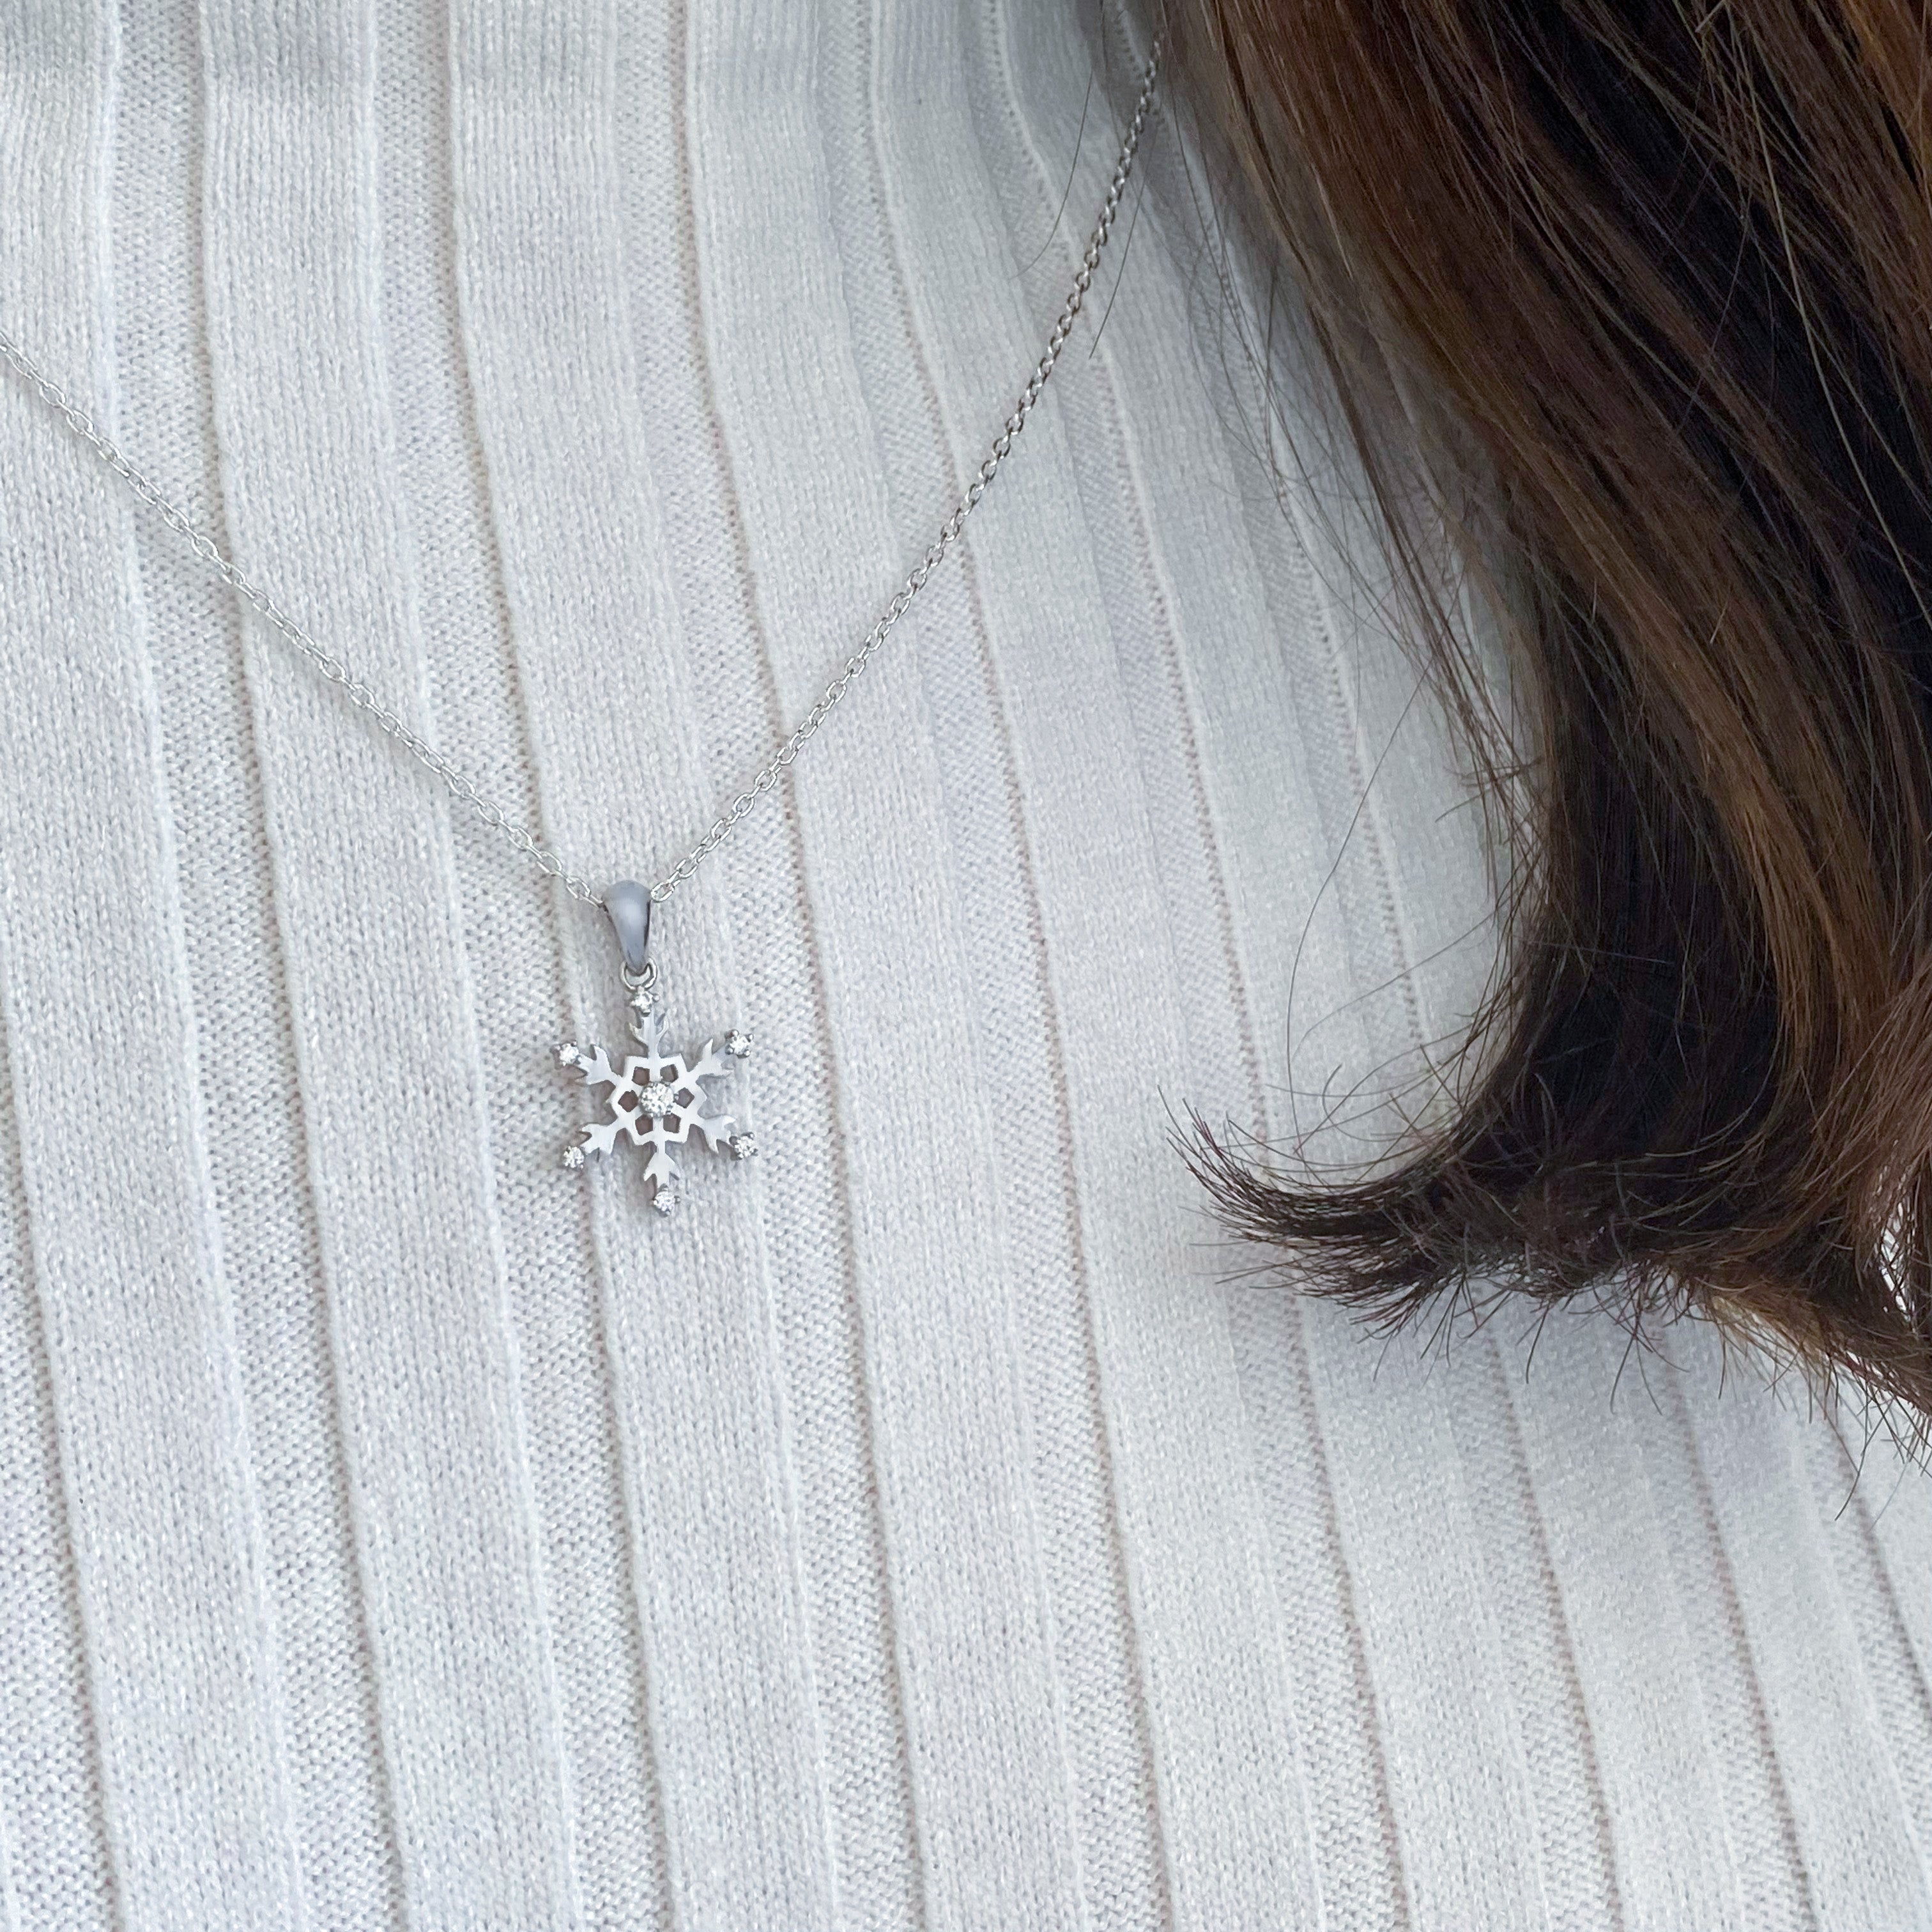 Snowflake Necklace with Round Cubic Zirconias